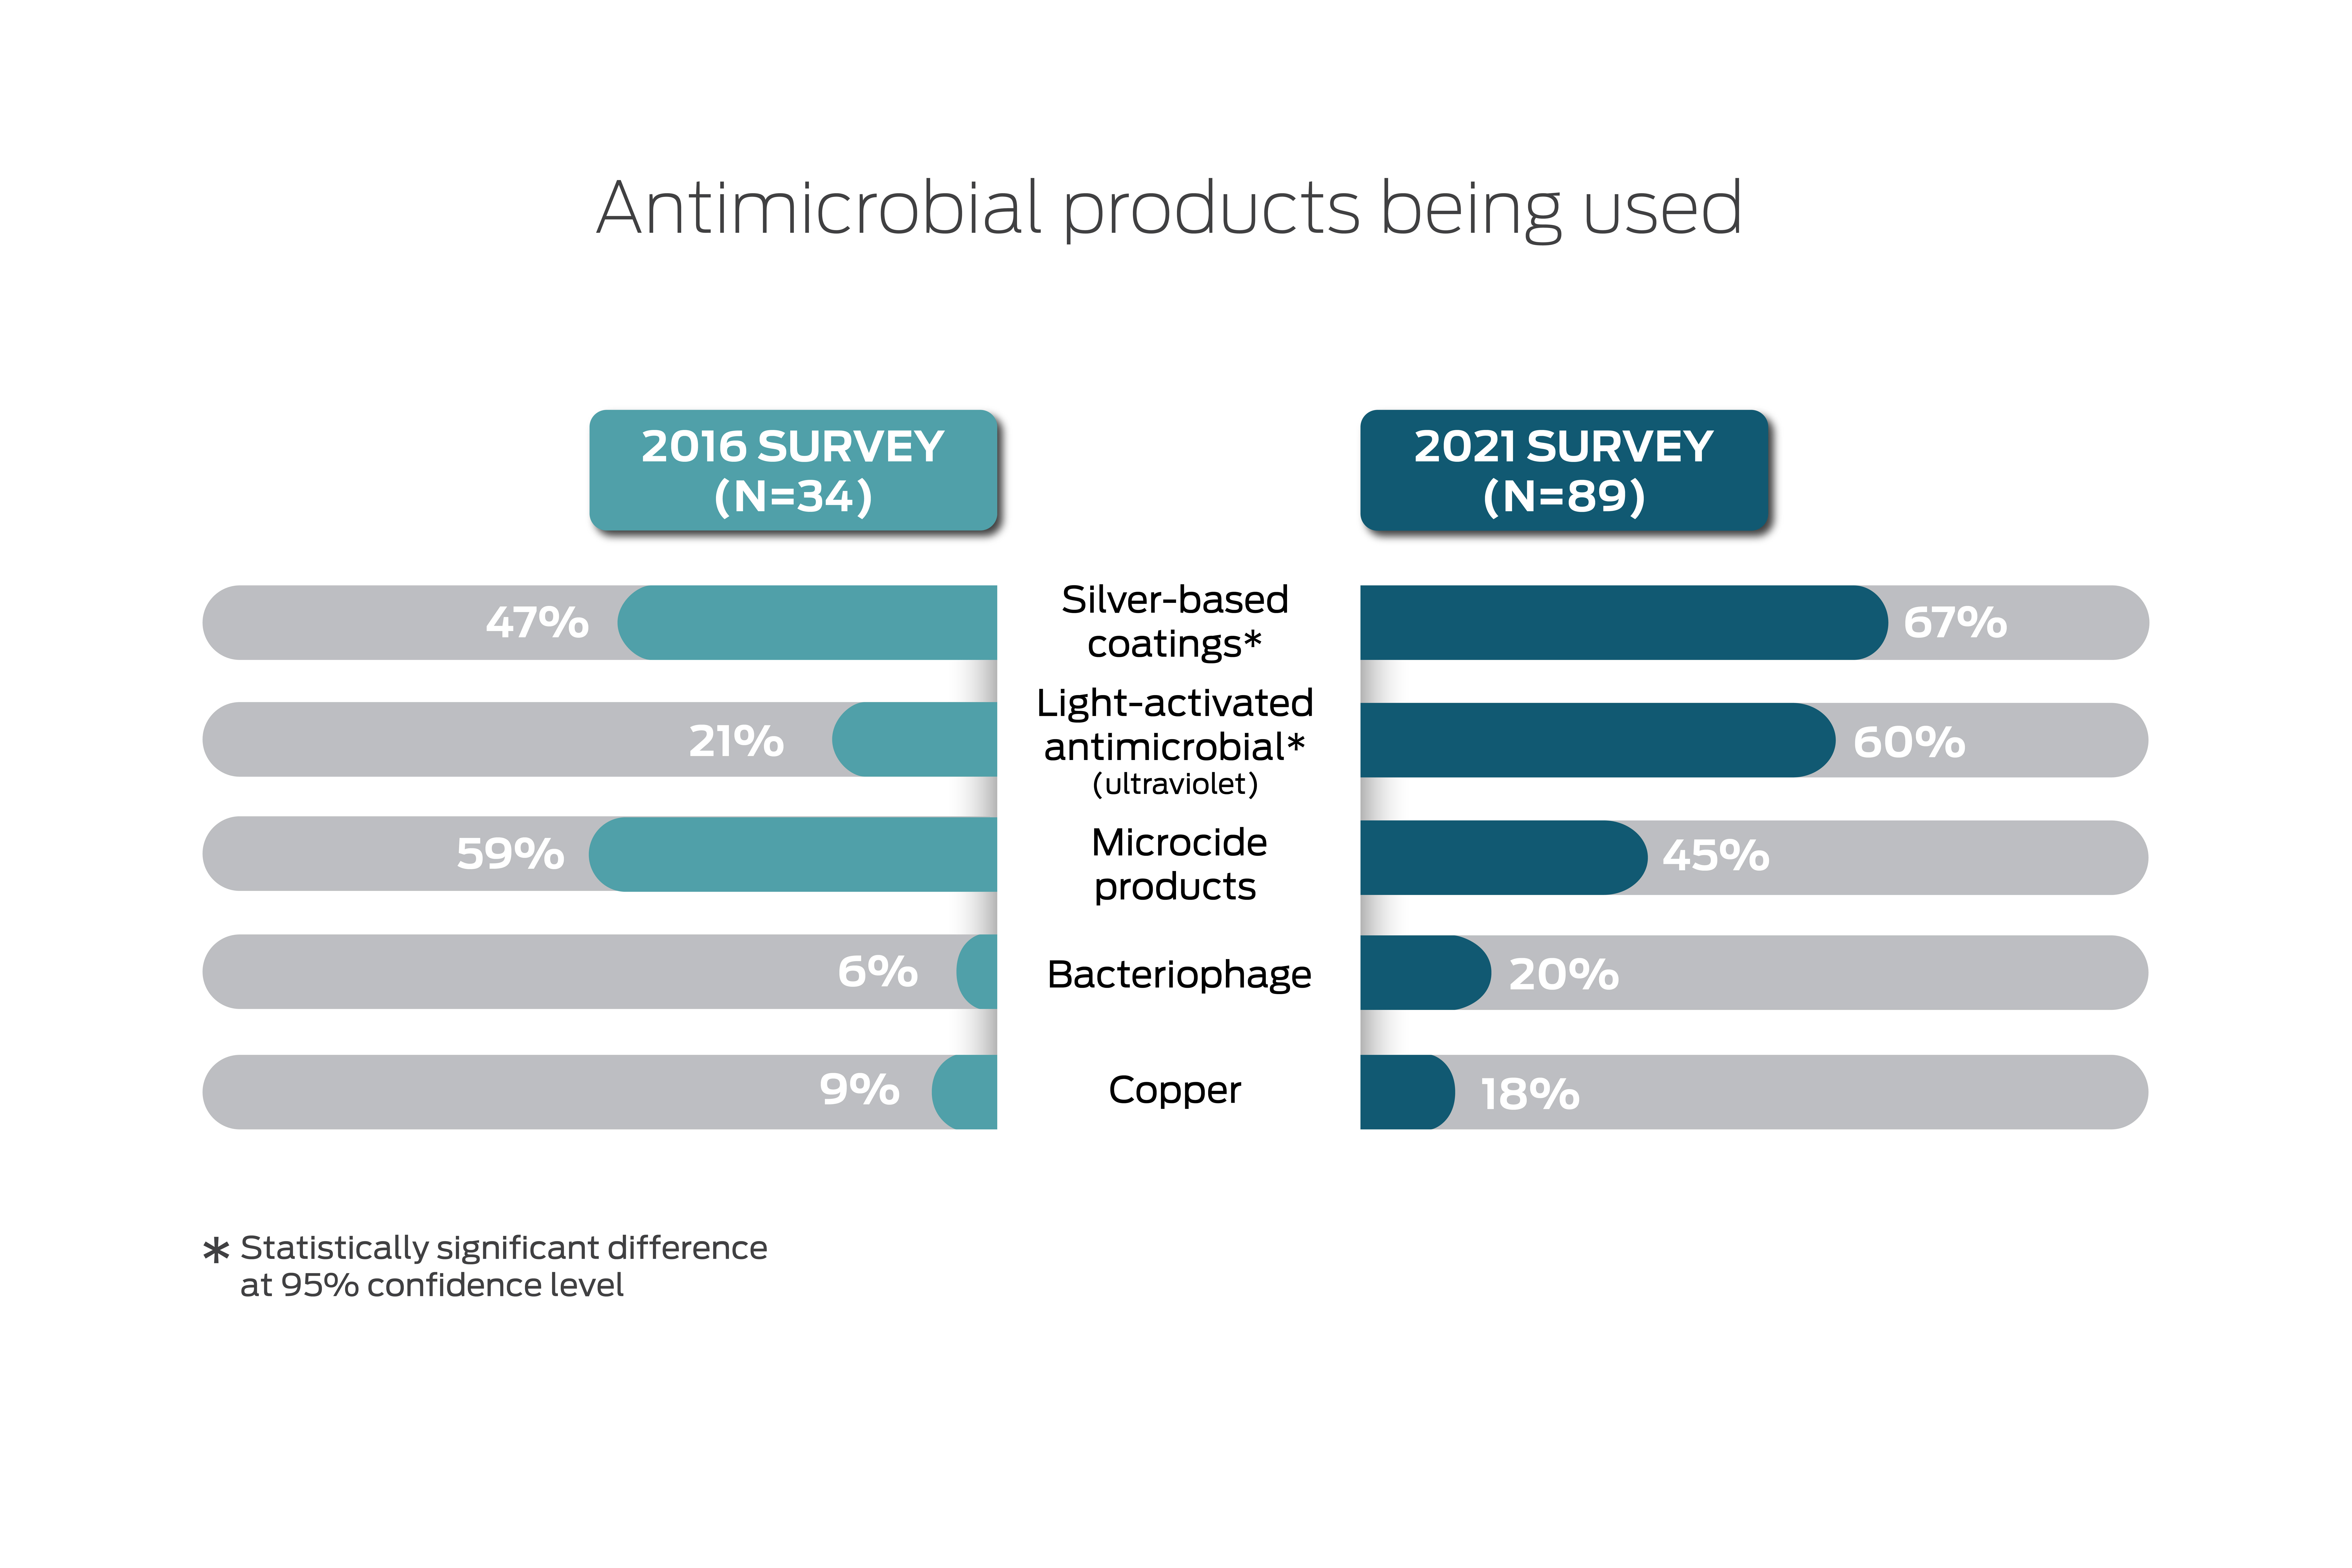 Antimicrobial usage in hospitals for infection control